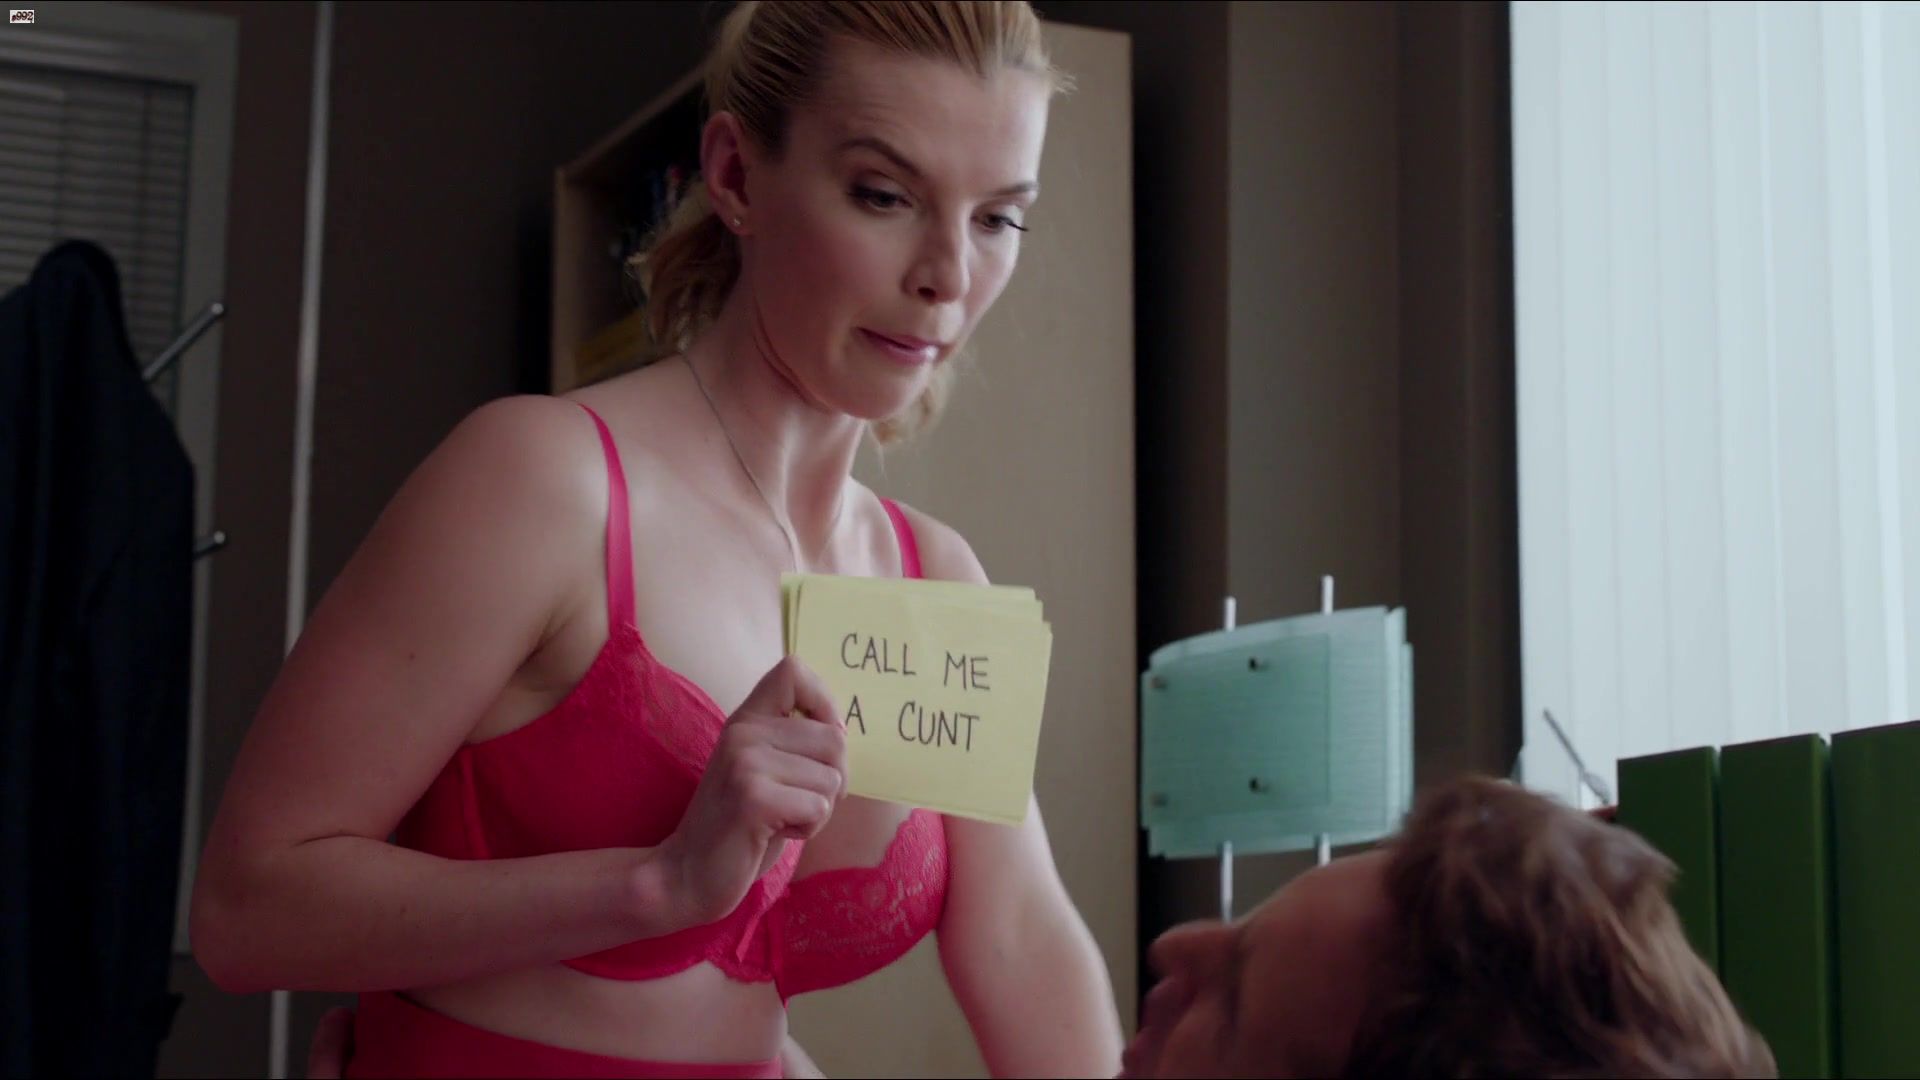 Pierced Betty Gilpin topless cowgirl scene of the TV show "Nurse Jackie" Cheating Wife